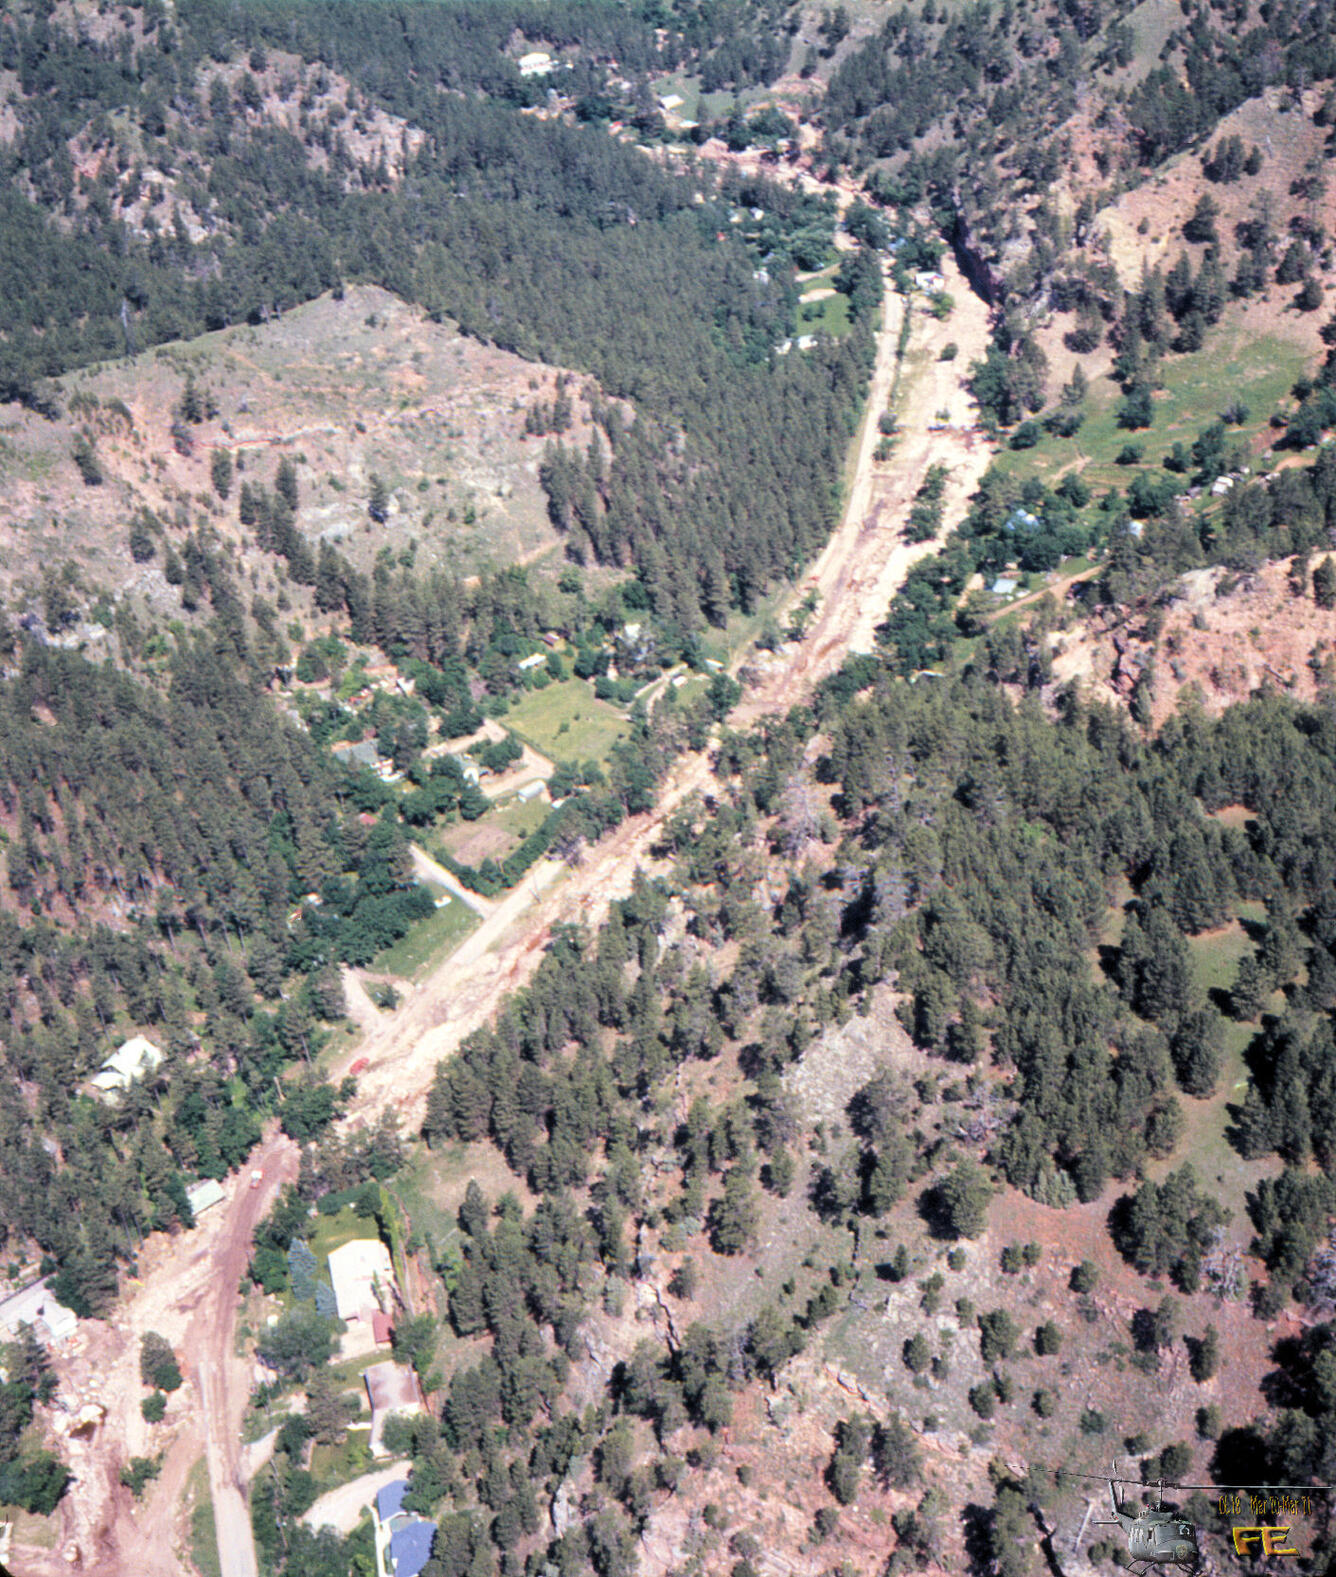 Clehorn Canyon looking west